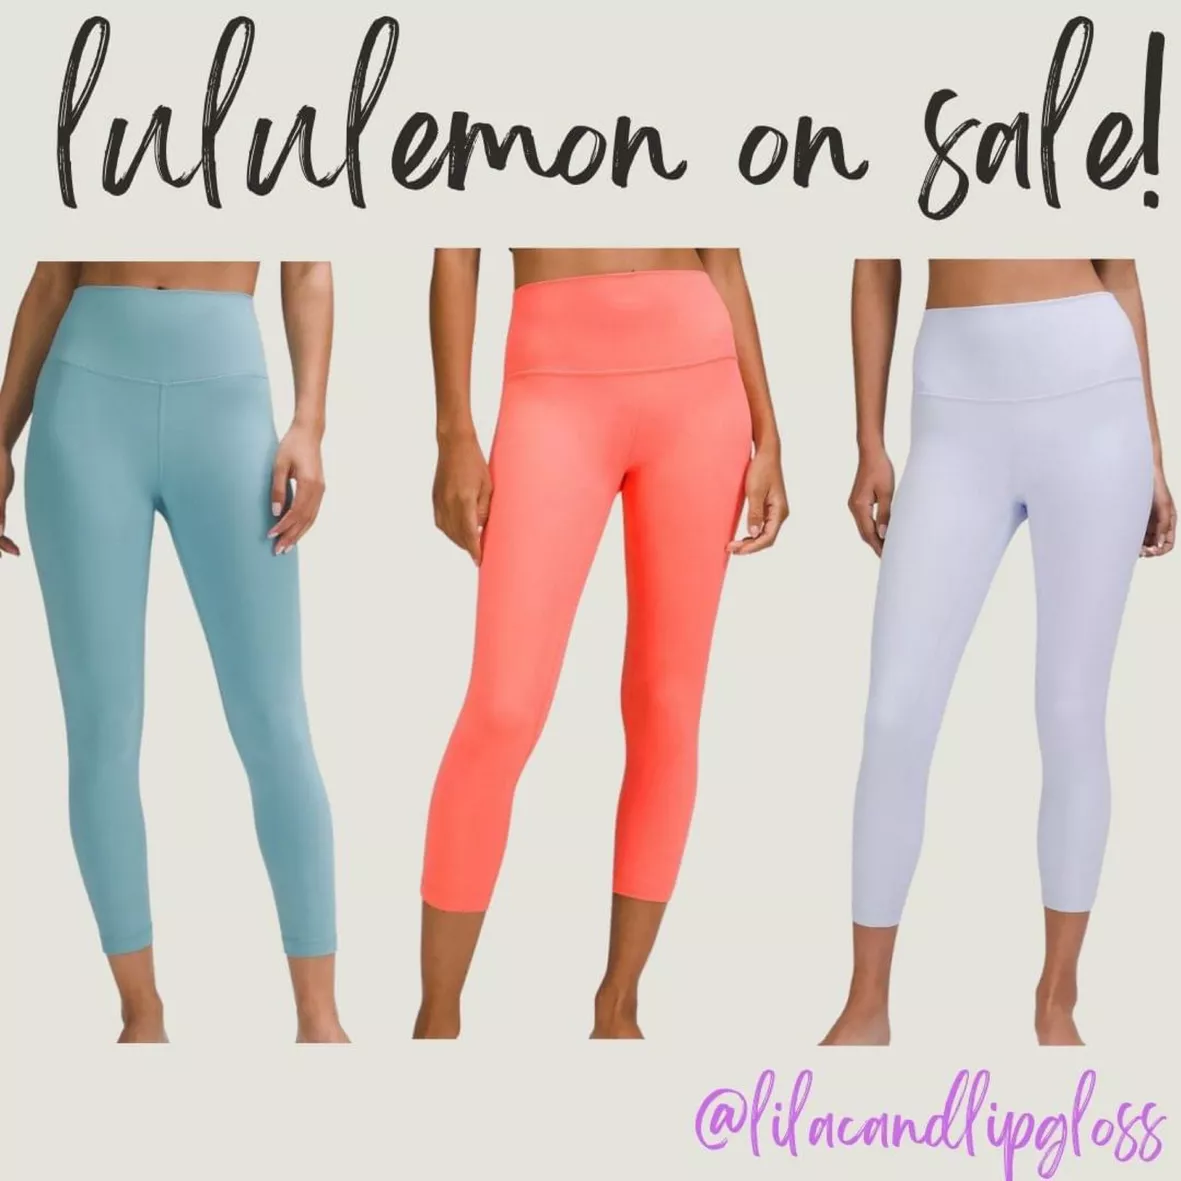 Lululemon Align Crop 23” Size 2 - $50 (50% Off Retail) - From Mimi